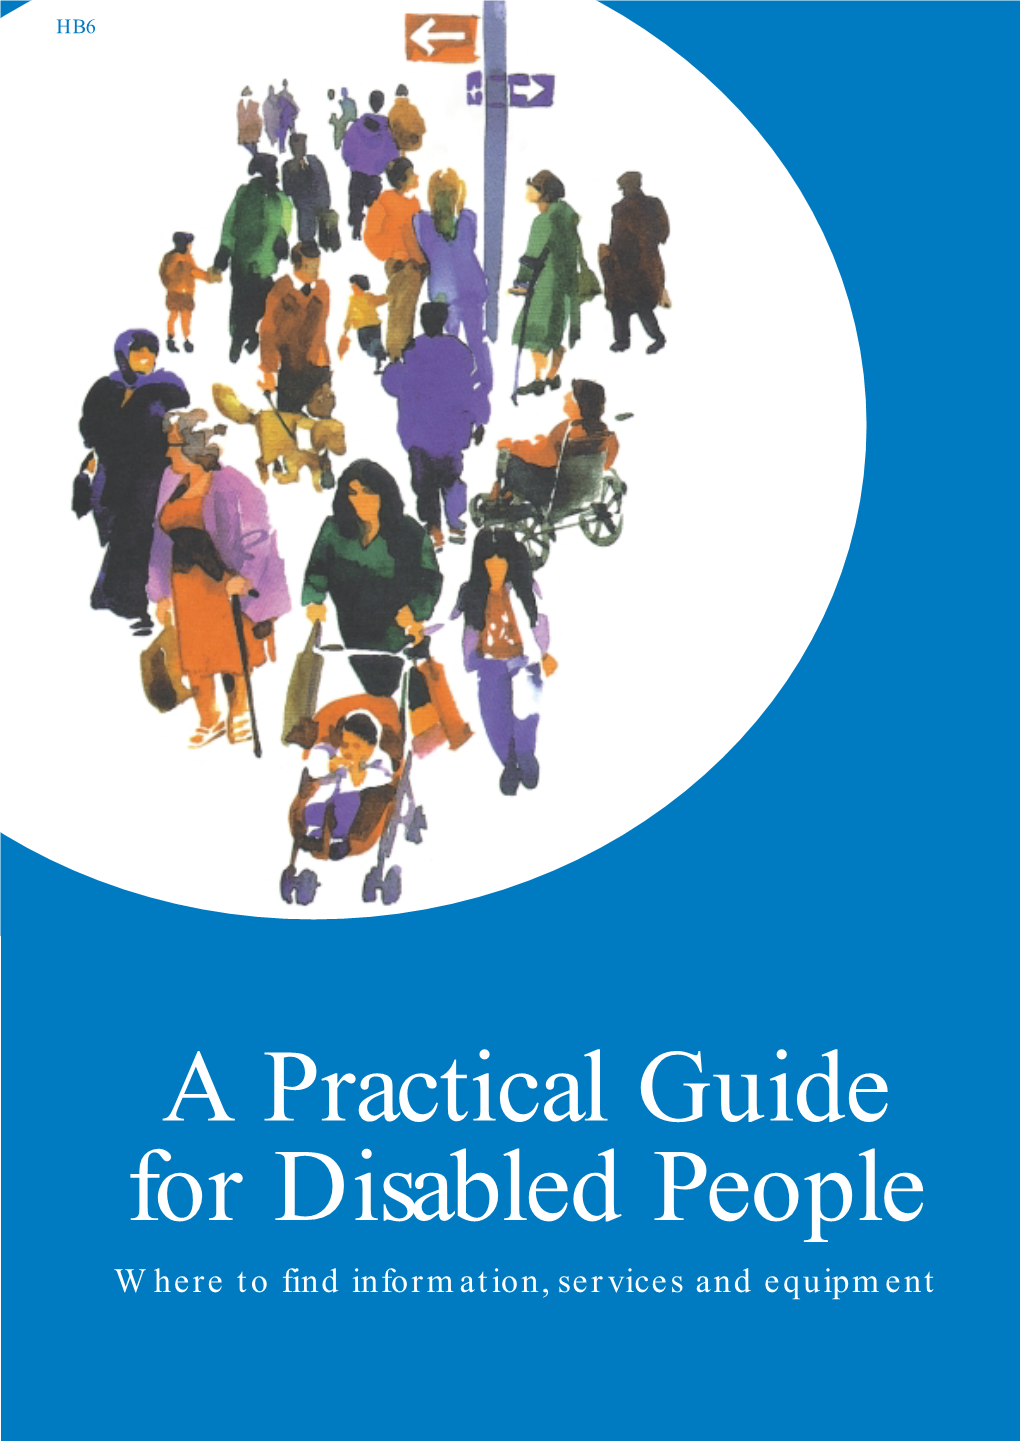 A Practical Guide for Disabled People